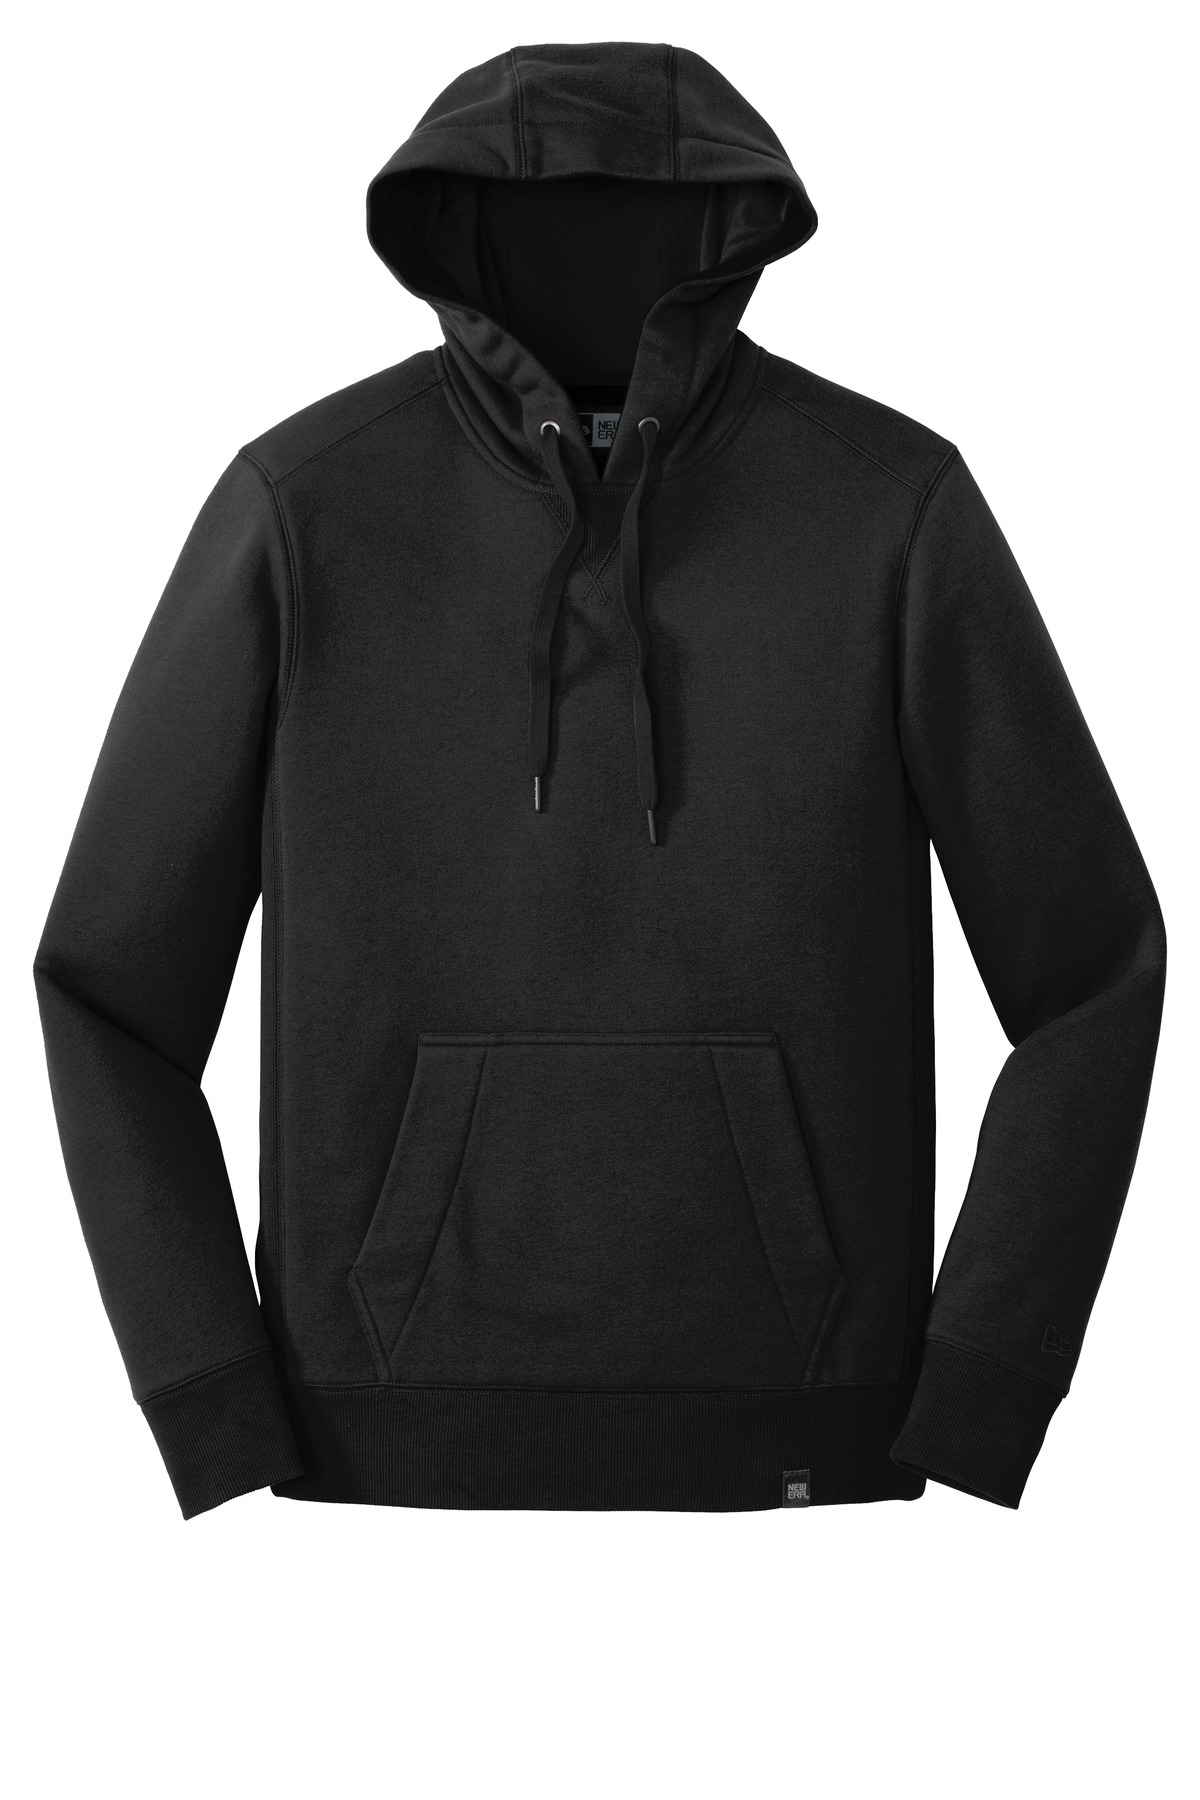 New Era French Terry Pullover Hoodie. NEA500